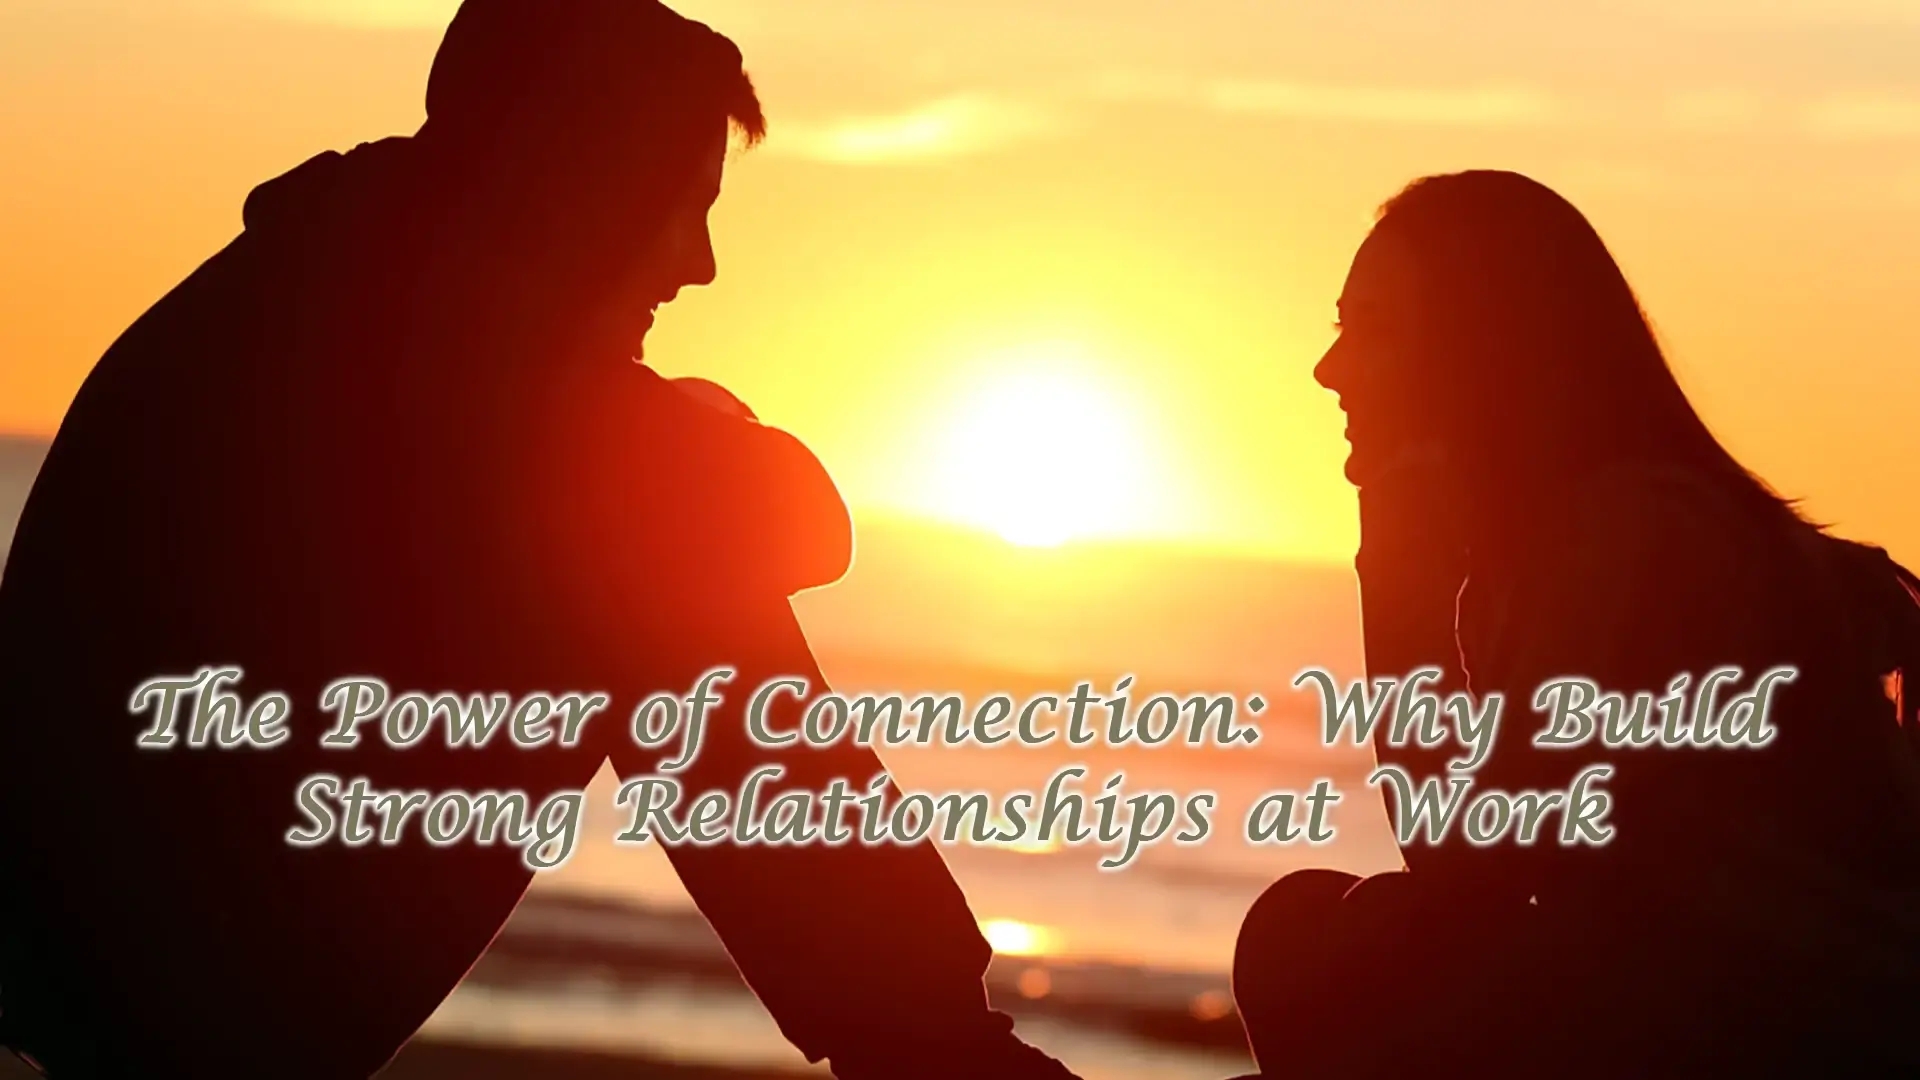 The Power of Connection: Why Build Strong Relationships at Work